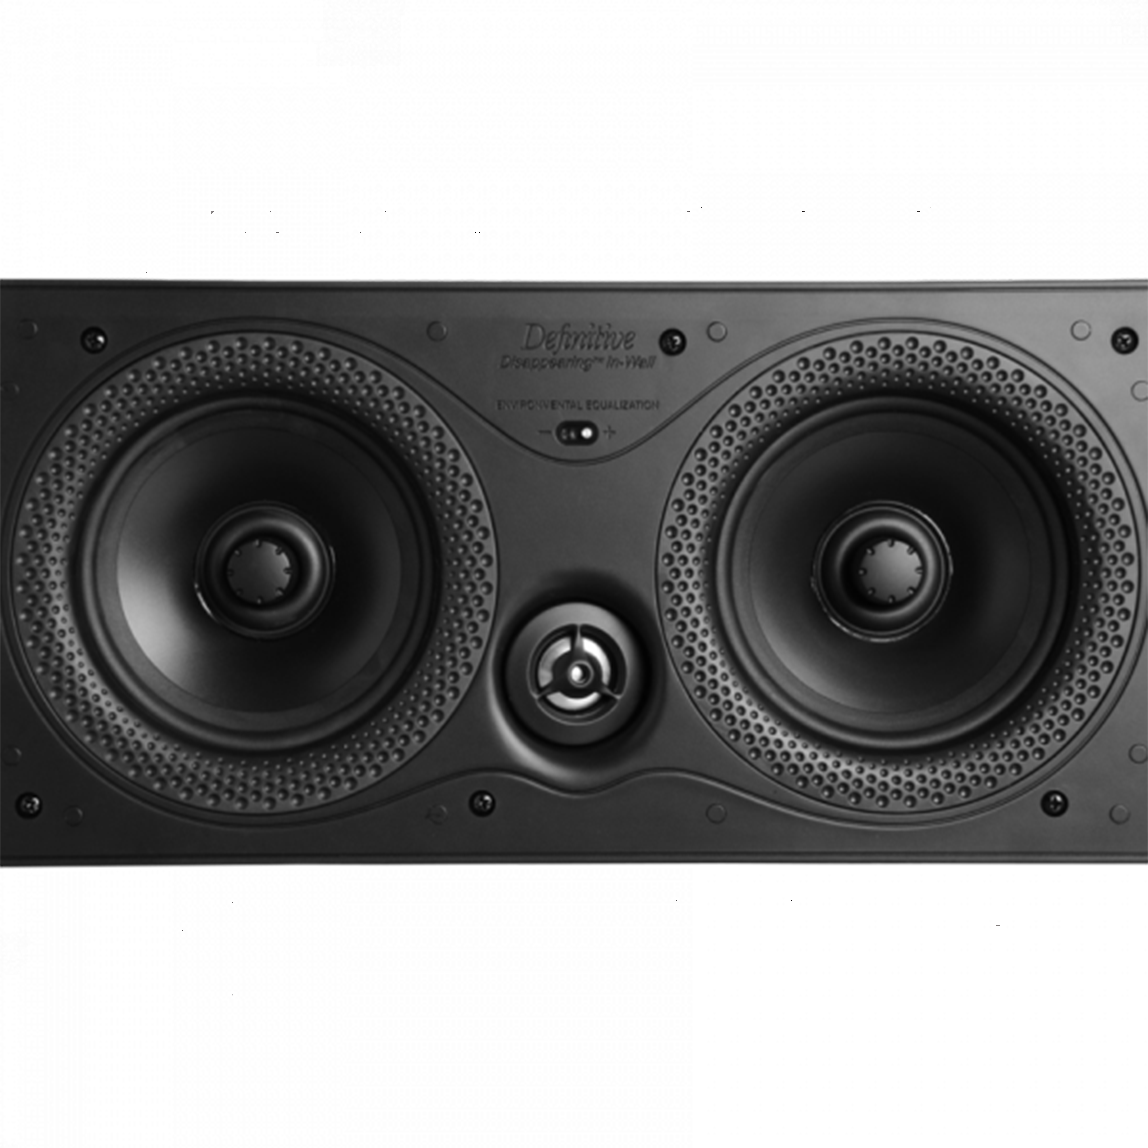 Definitive Technology DI 5.5LCR Disappering Series 5.5'' In-Wall Speaker (Each)